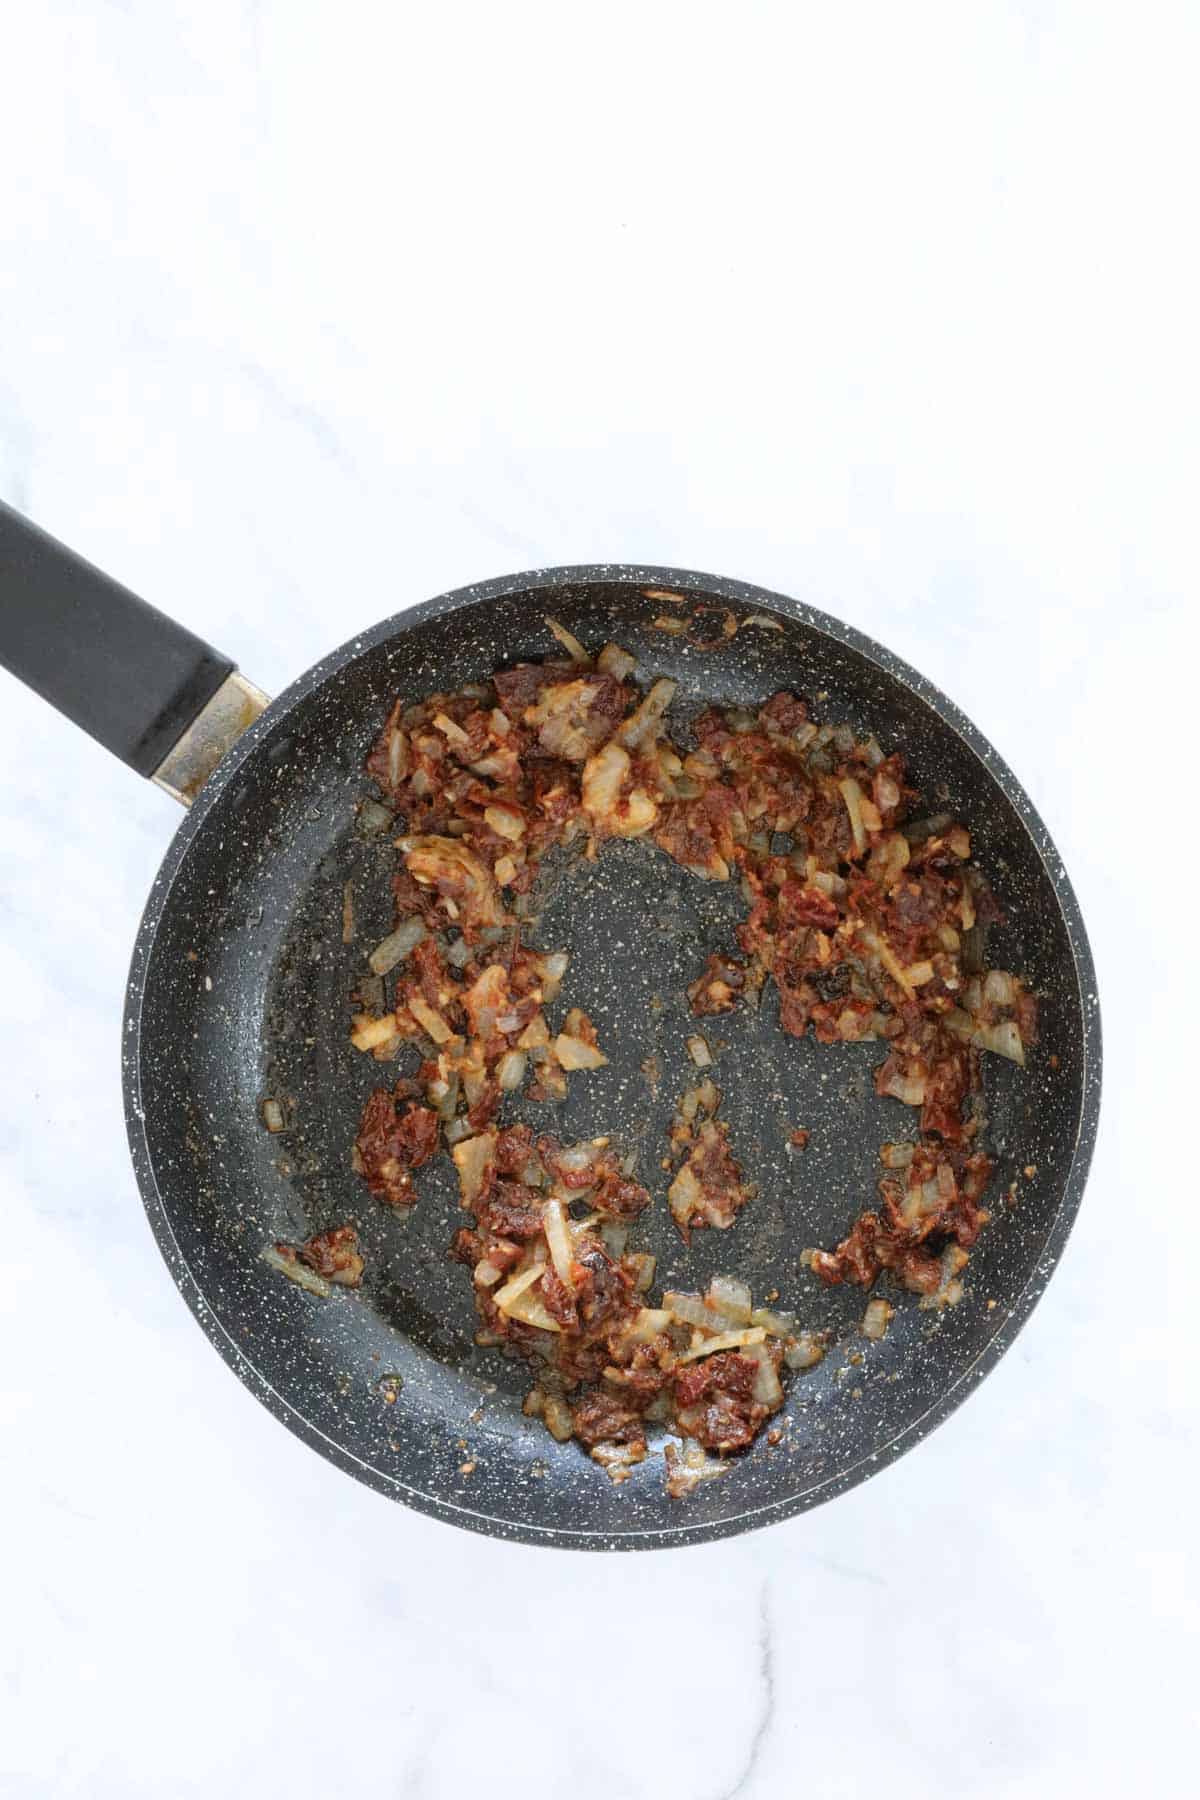 Cooked onion, garlic and sun dried tomatoes in a frying pan.